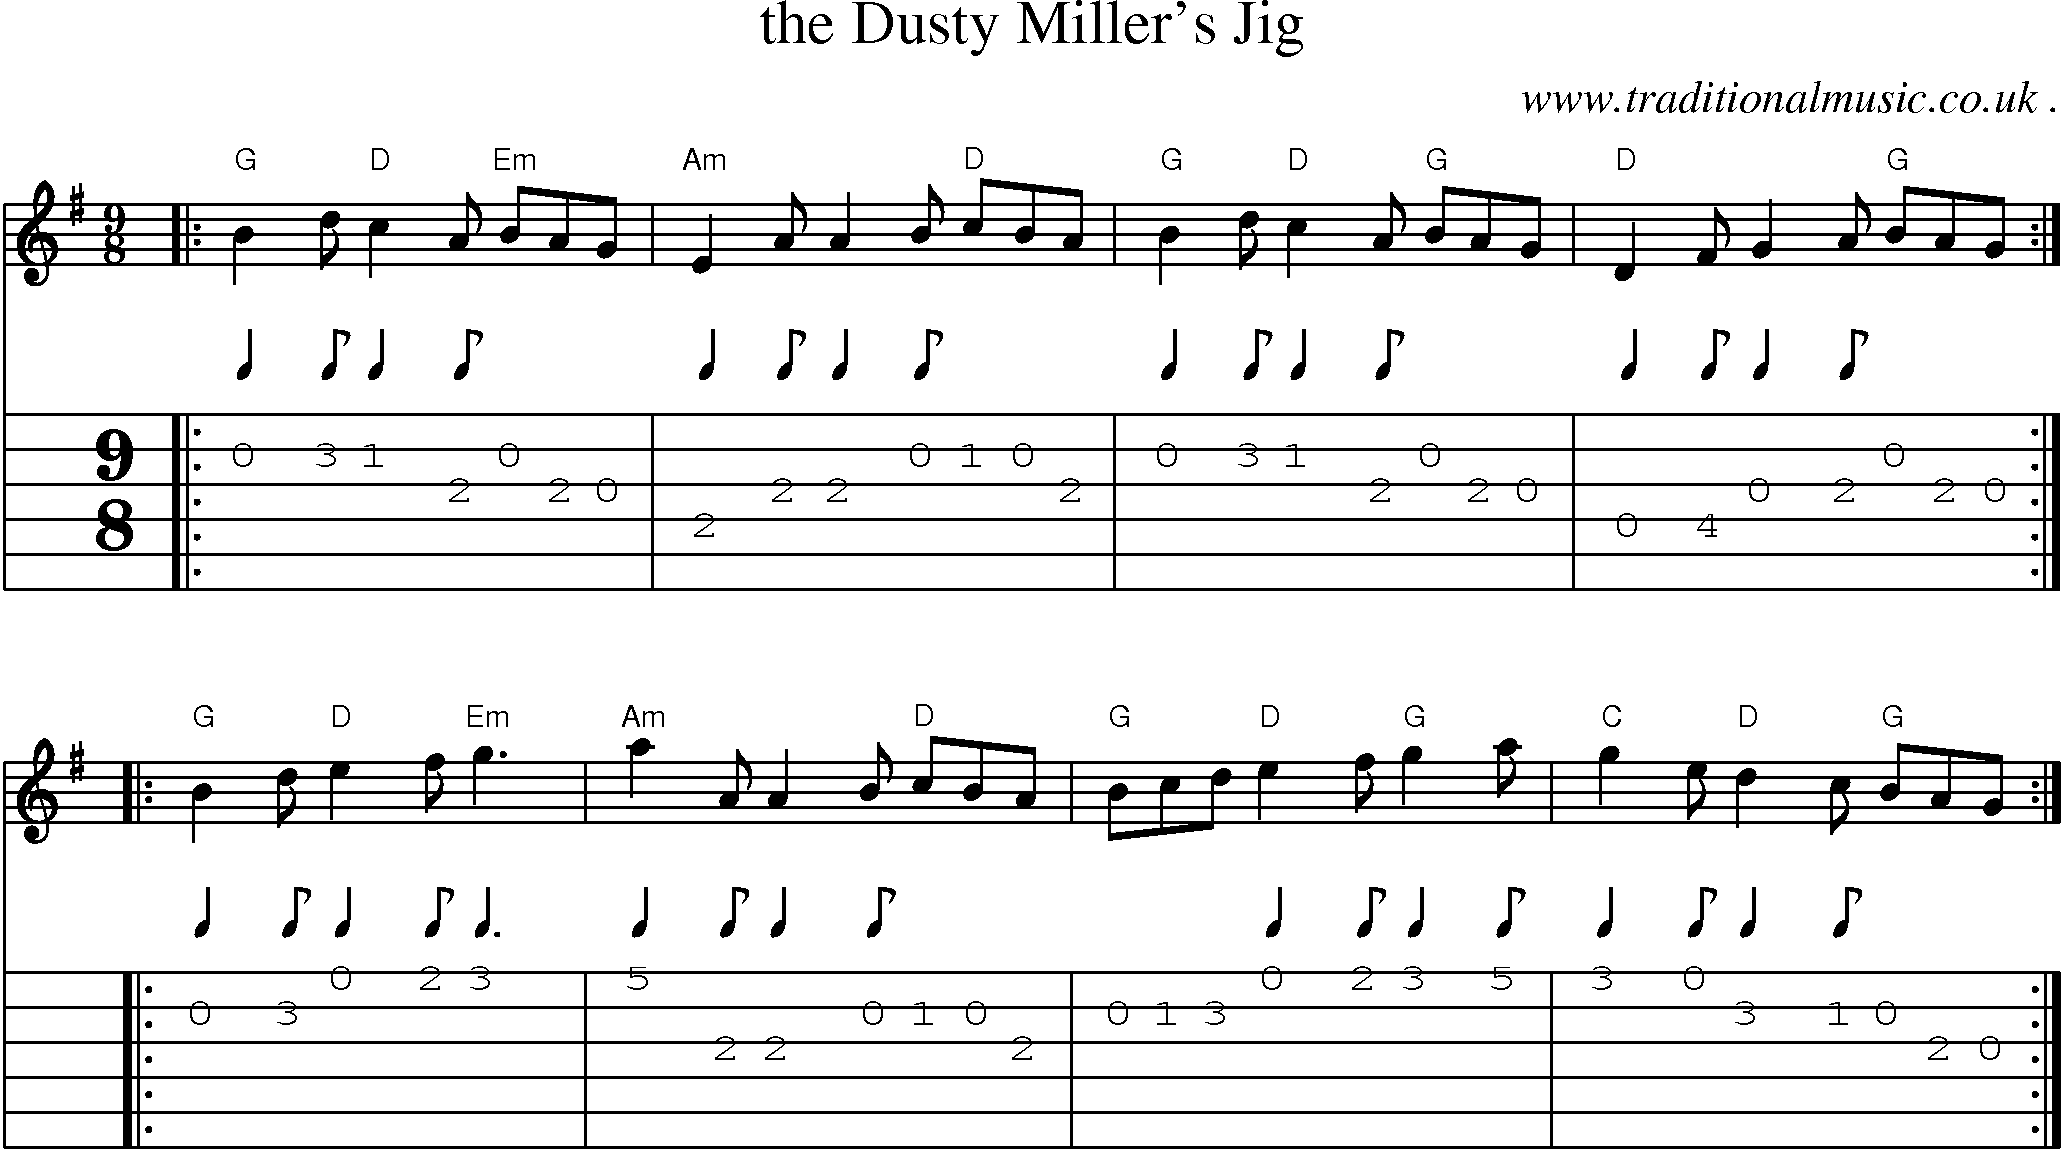 Sheet-music  score, Chords and Guitar Tabs for The Dusty Millers Jig